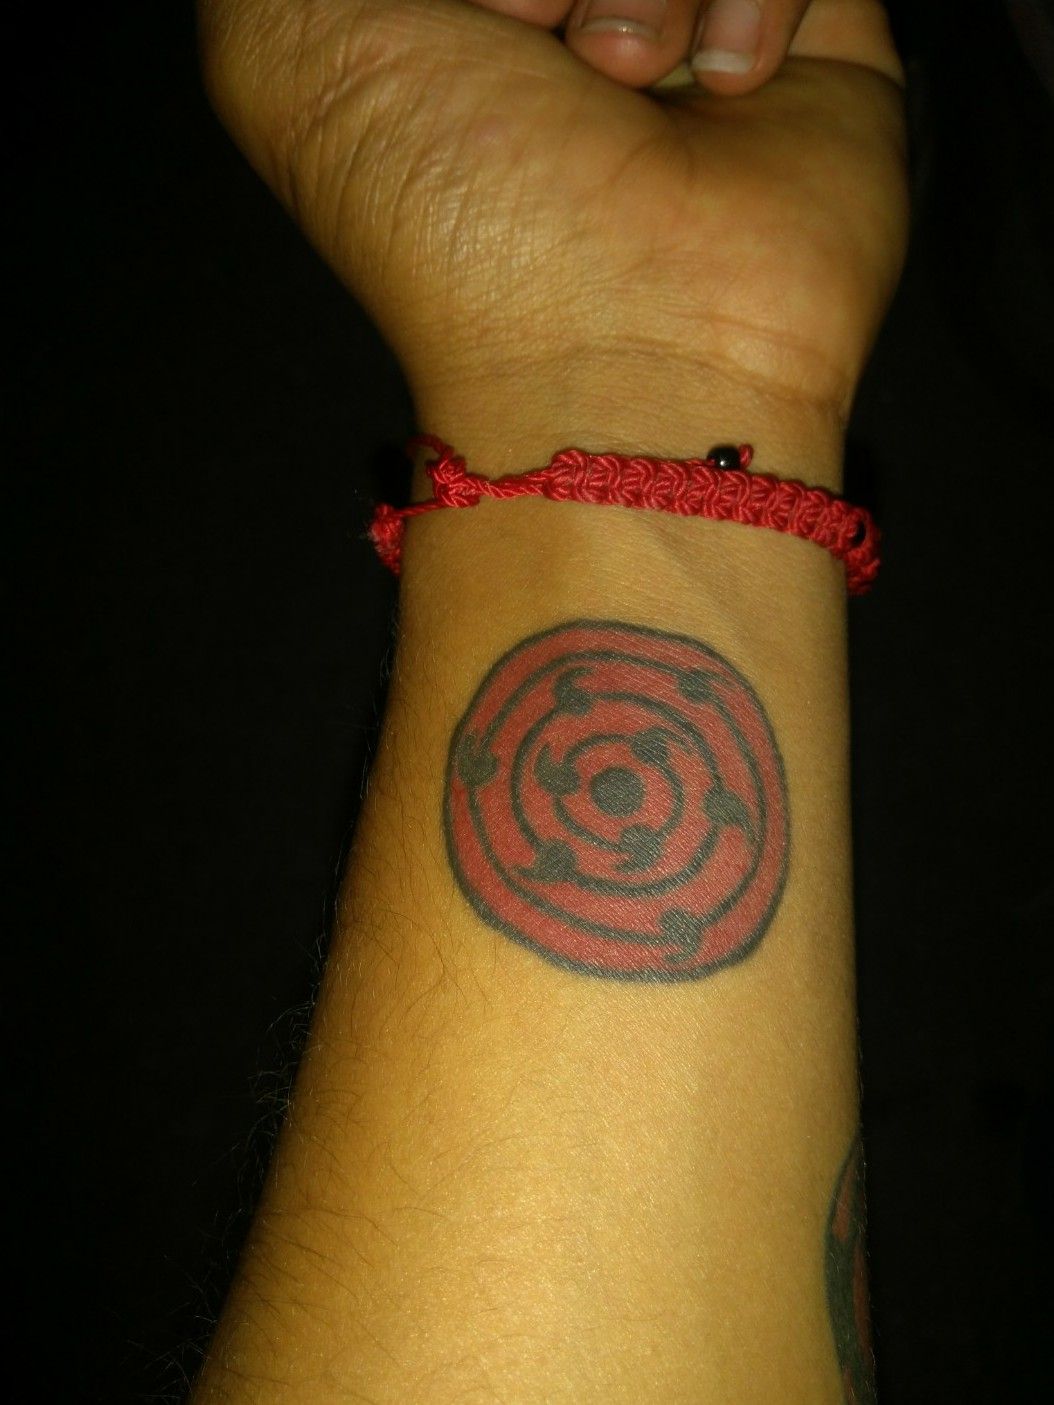 My new tattoo  what do you all think  rNaruto